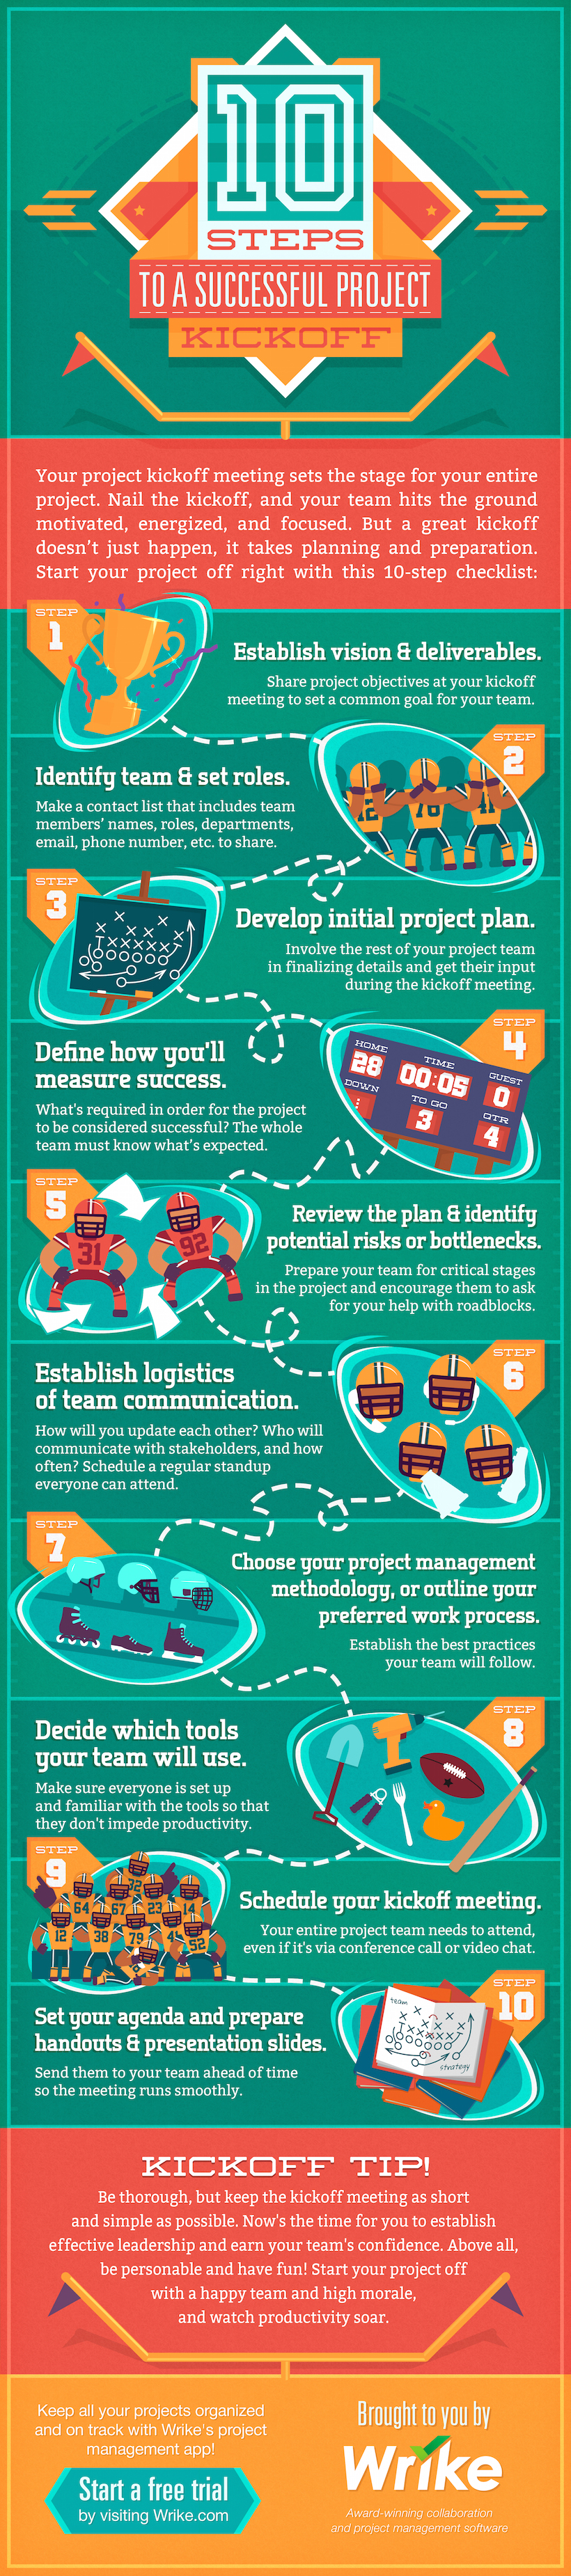 10 Steps to a Kickass Project Kickoff: A Checklist for Project Managers (#Infographic)